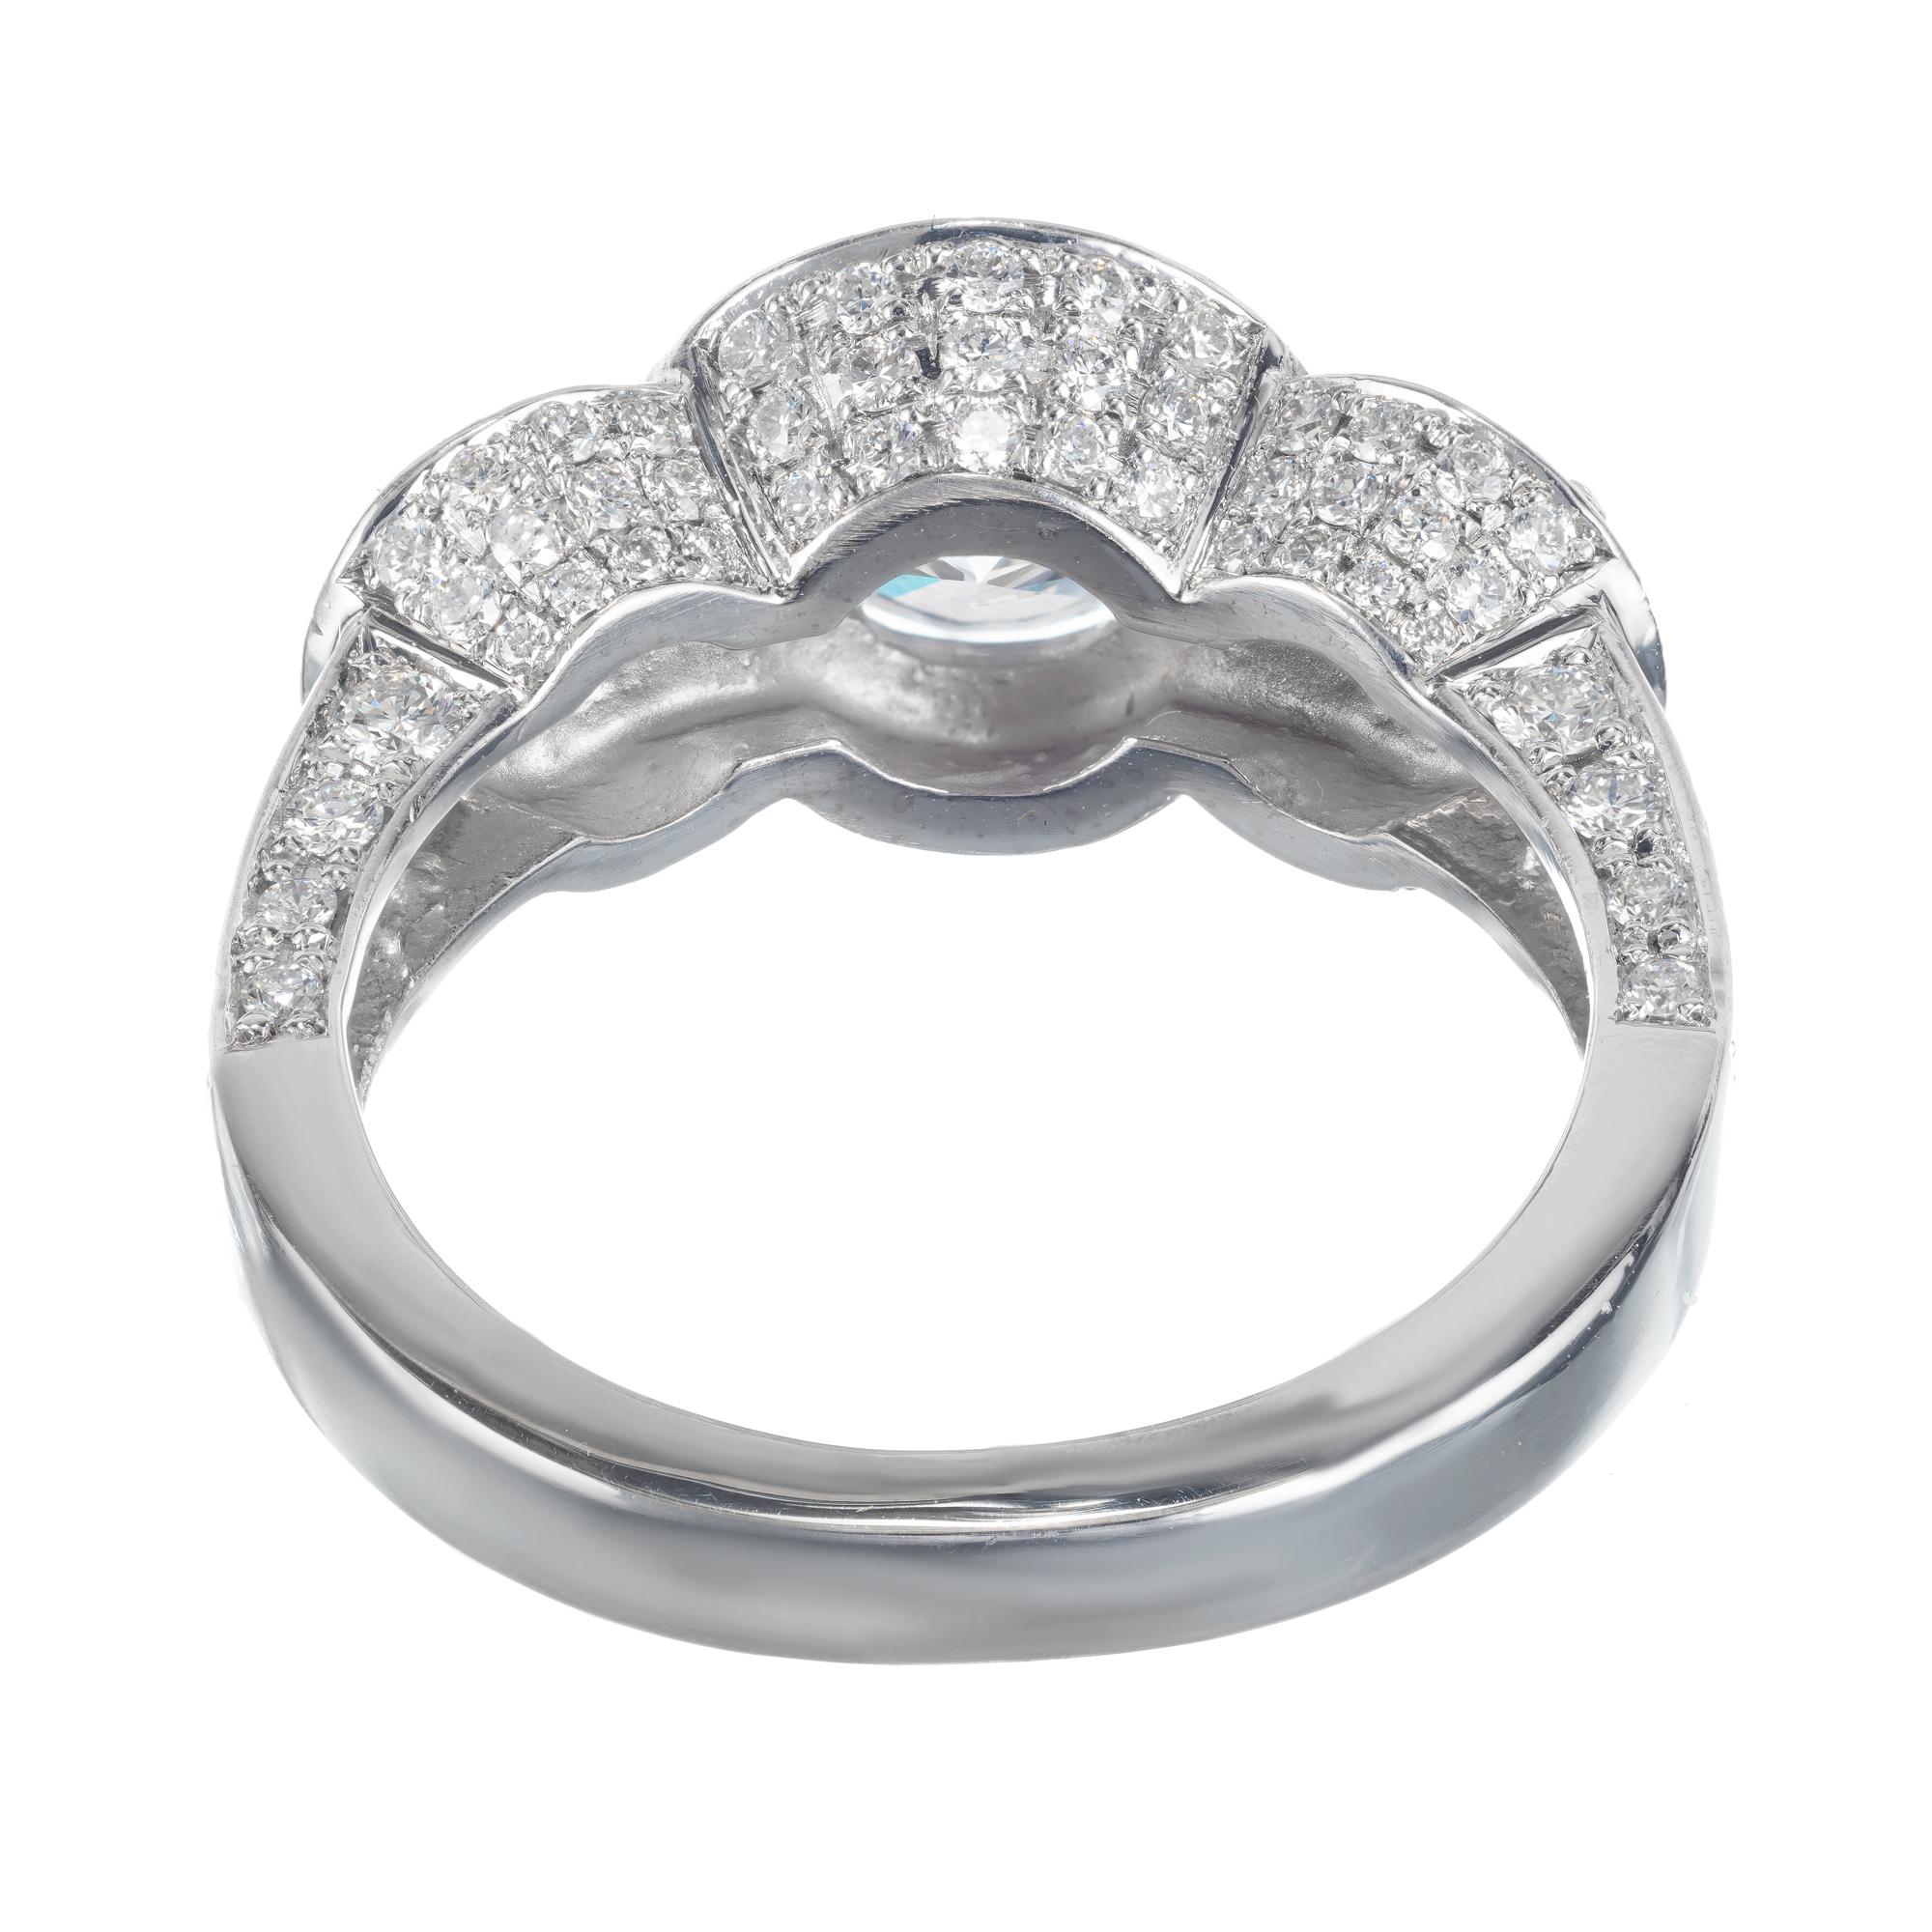 Peter Suchy GIA 1.81 Carat Round Diamond Platinum Three-Stone Engagement Ring In New Condition For Sale In Stamford, CT